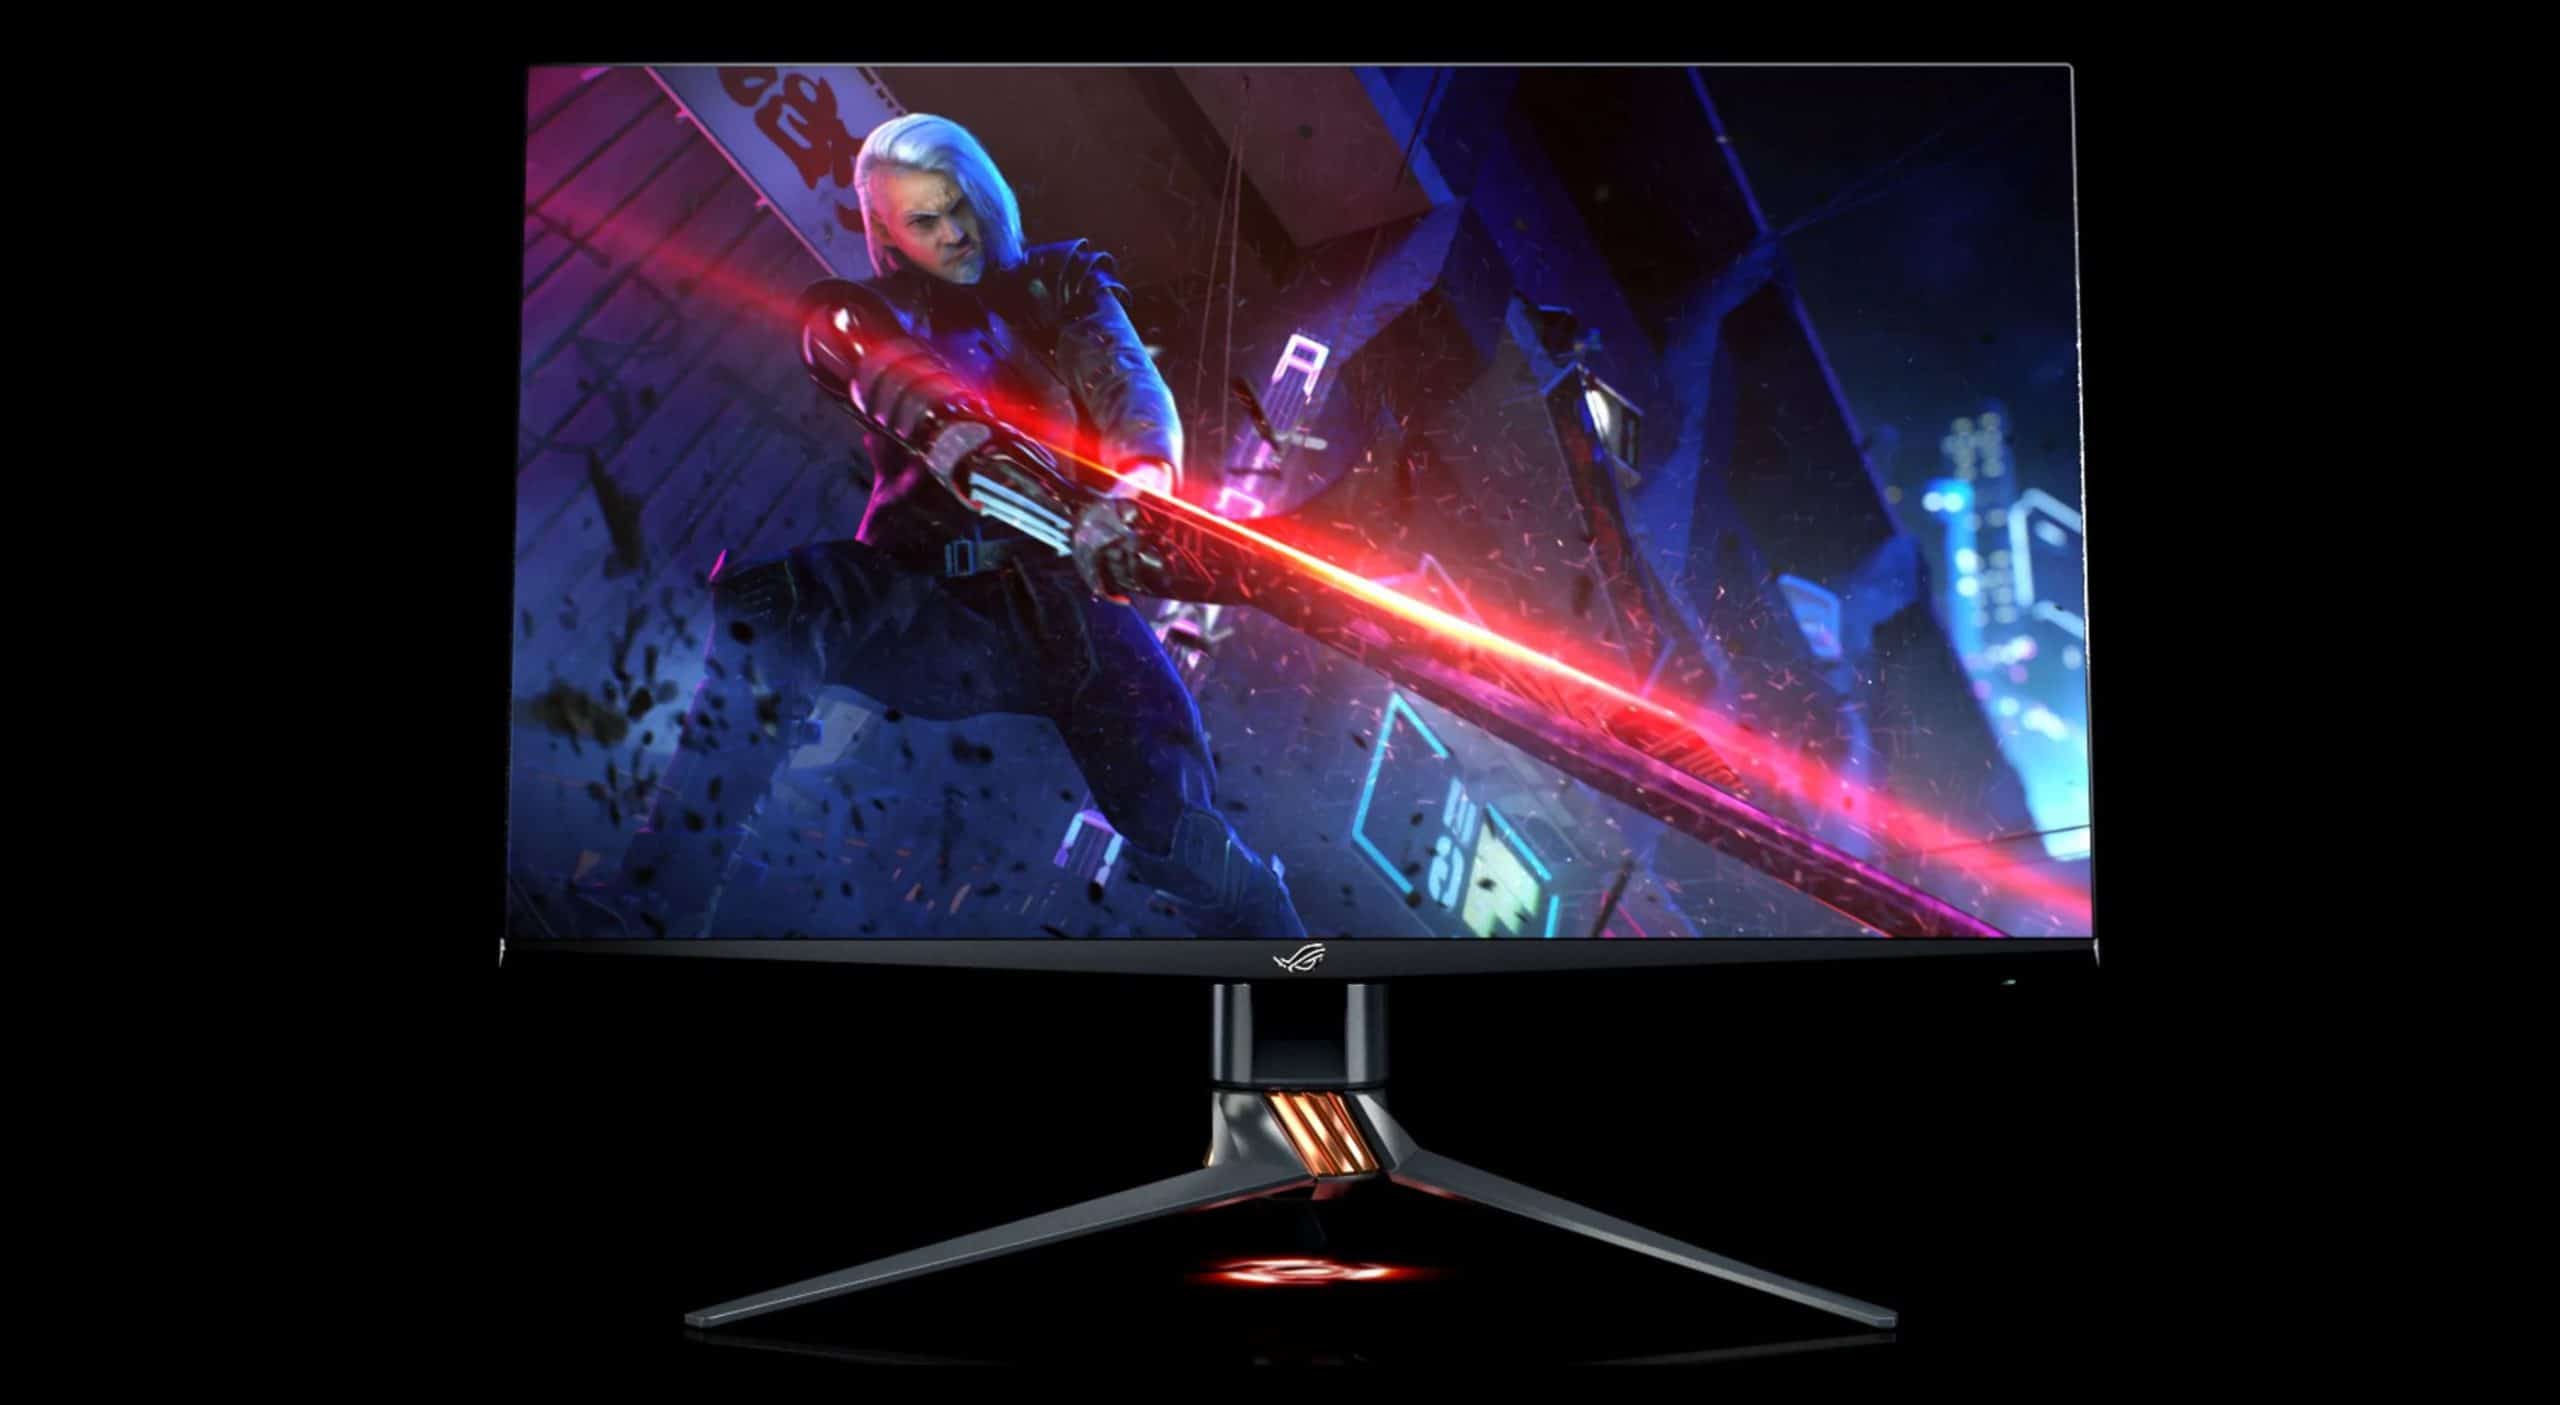 ROG has created the 4K gaming monitor of dreams, with Mini LED and HDR 1400